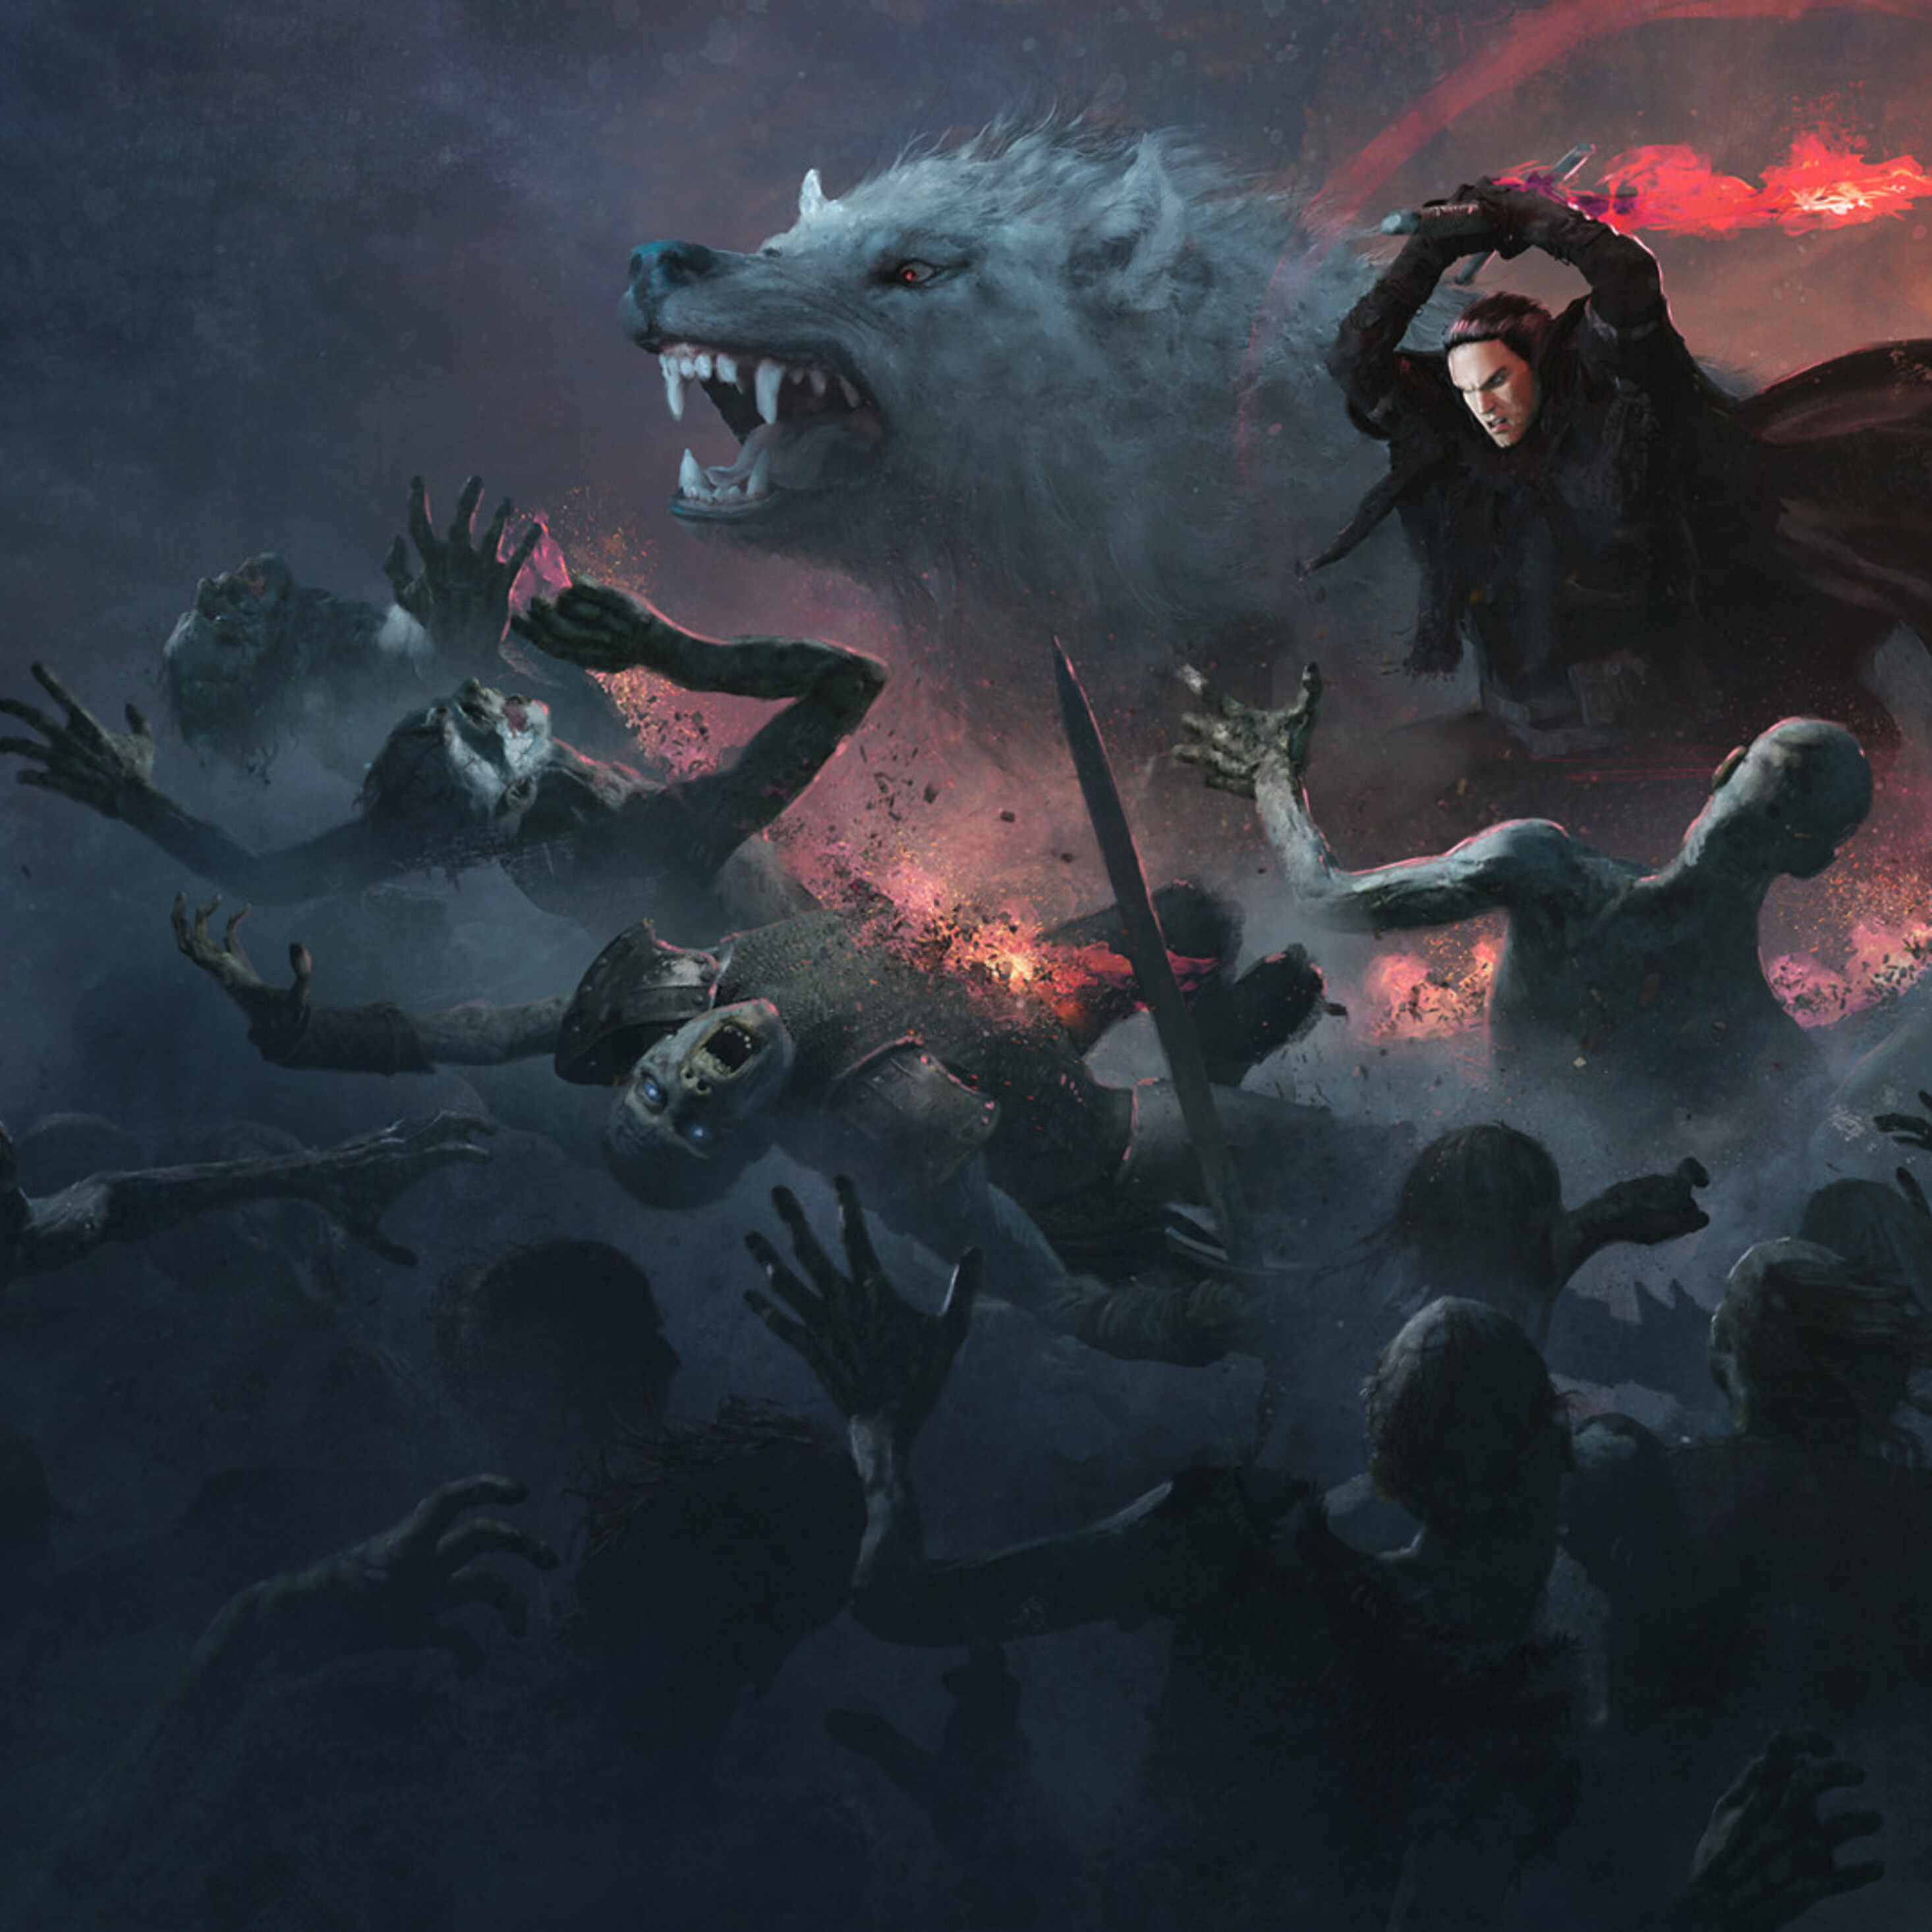 jon-snow-with-wolf-attacking-white-walkers-artwork-88.jpg